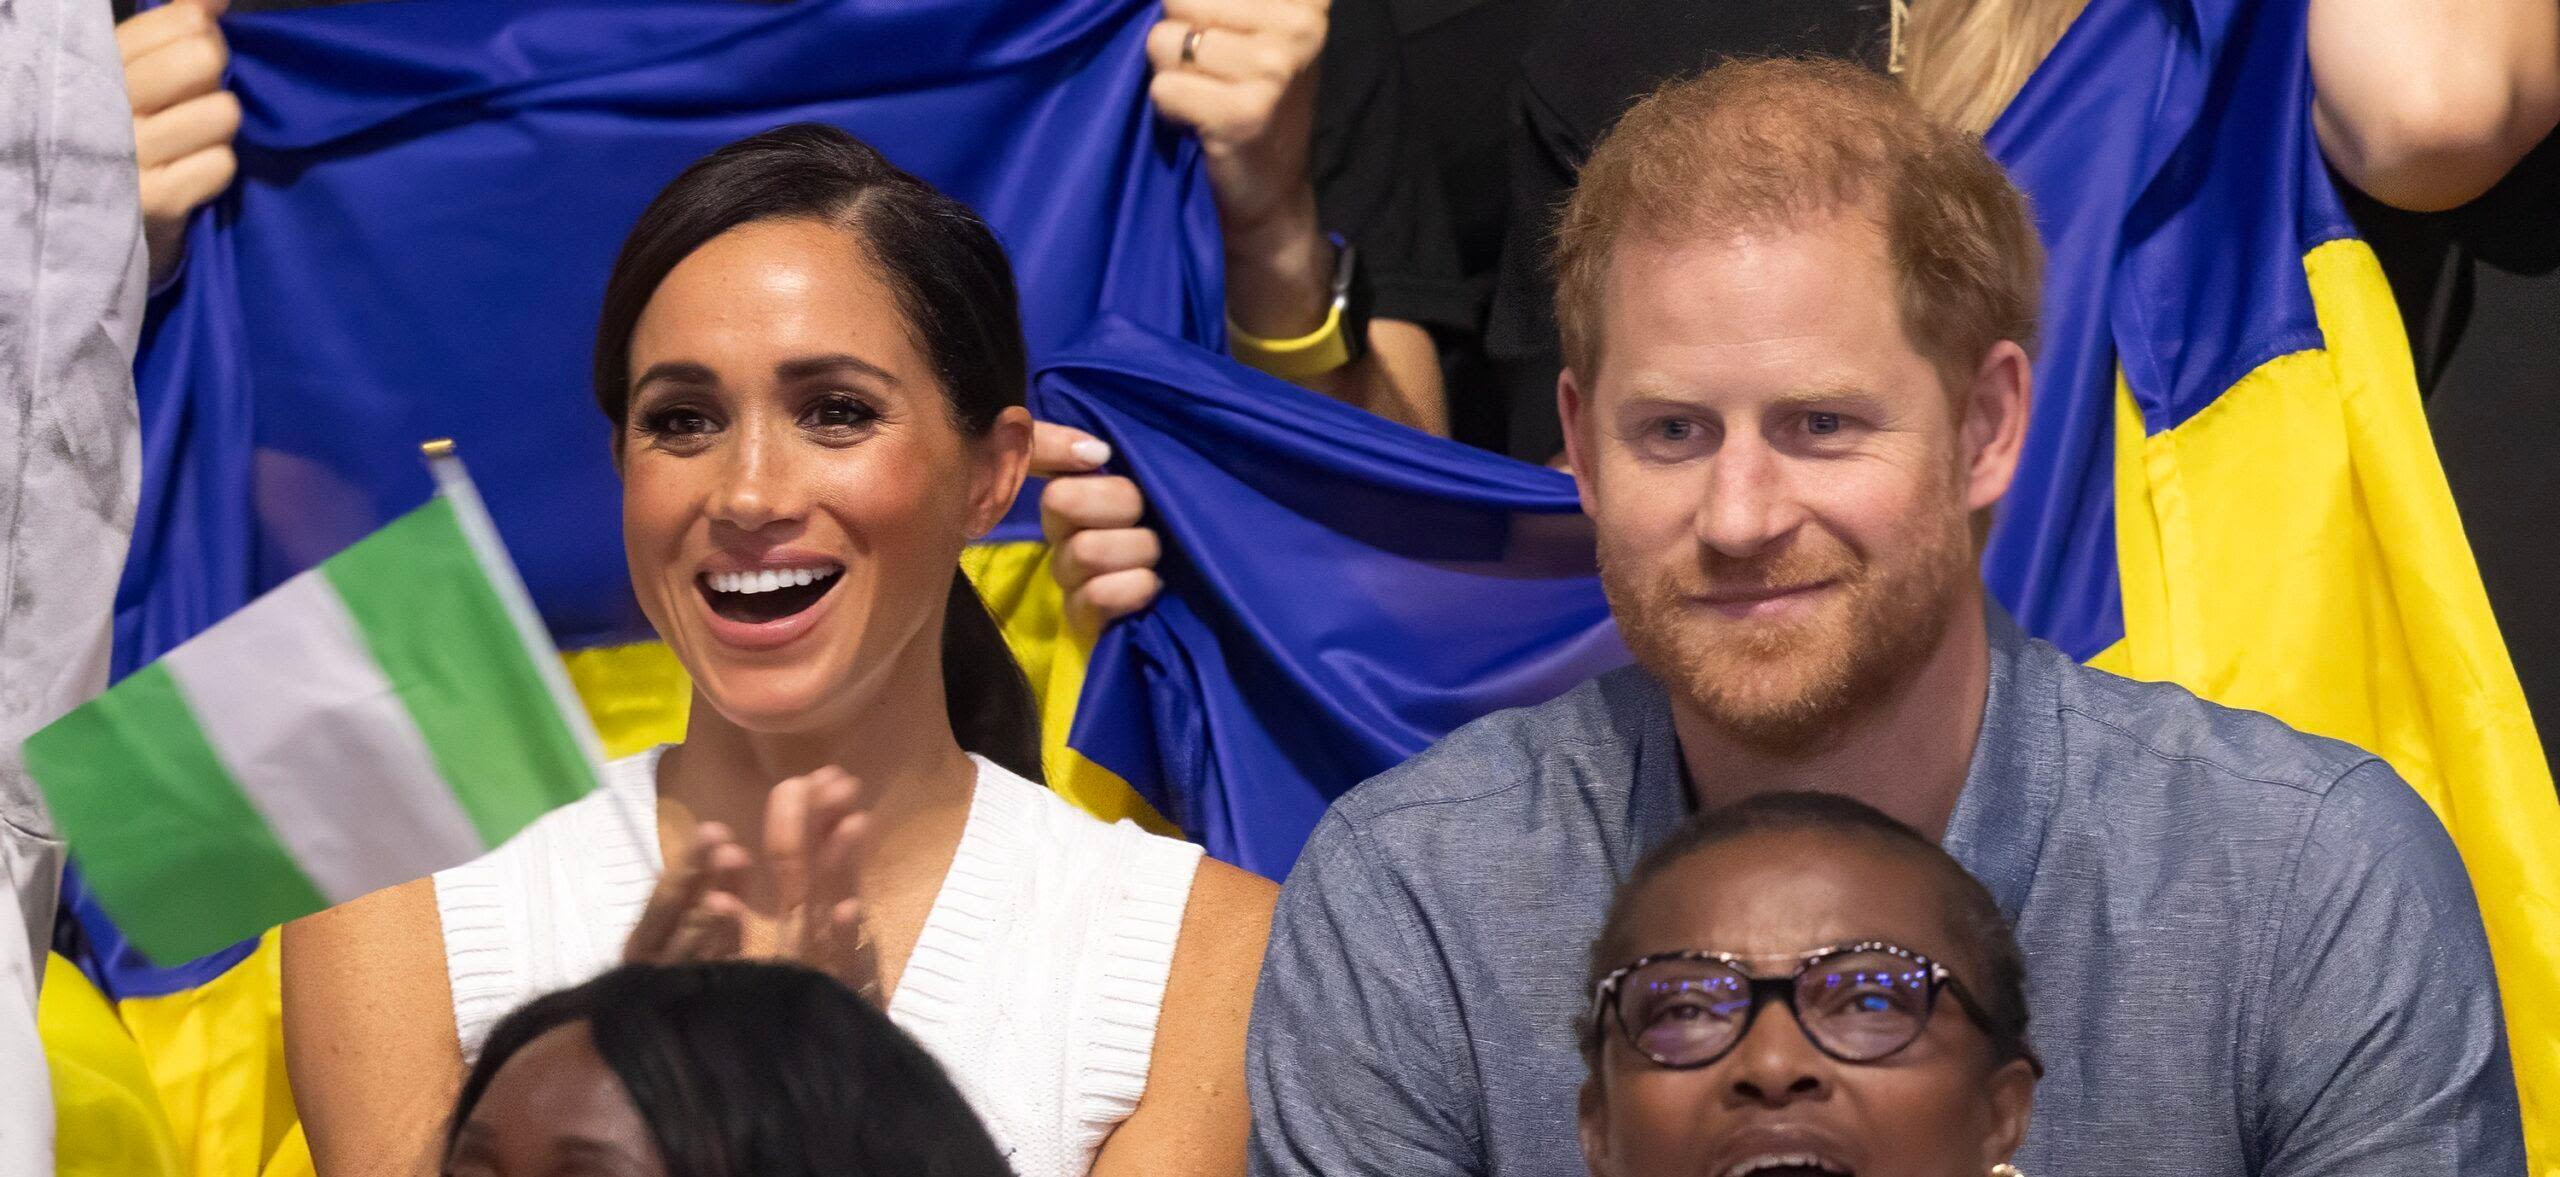 Prince Harry And Meghan Markle Criticized Over 'Presidential-Style' Security In Nigeria